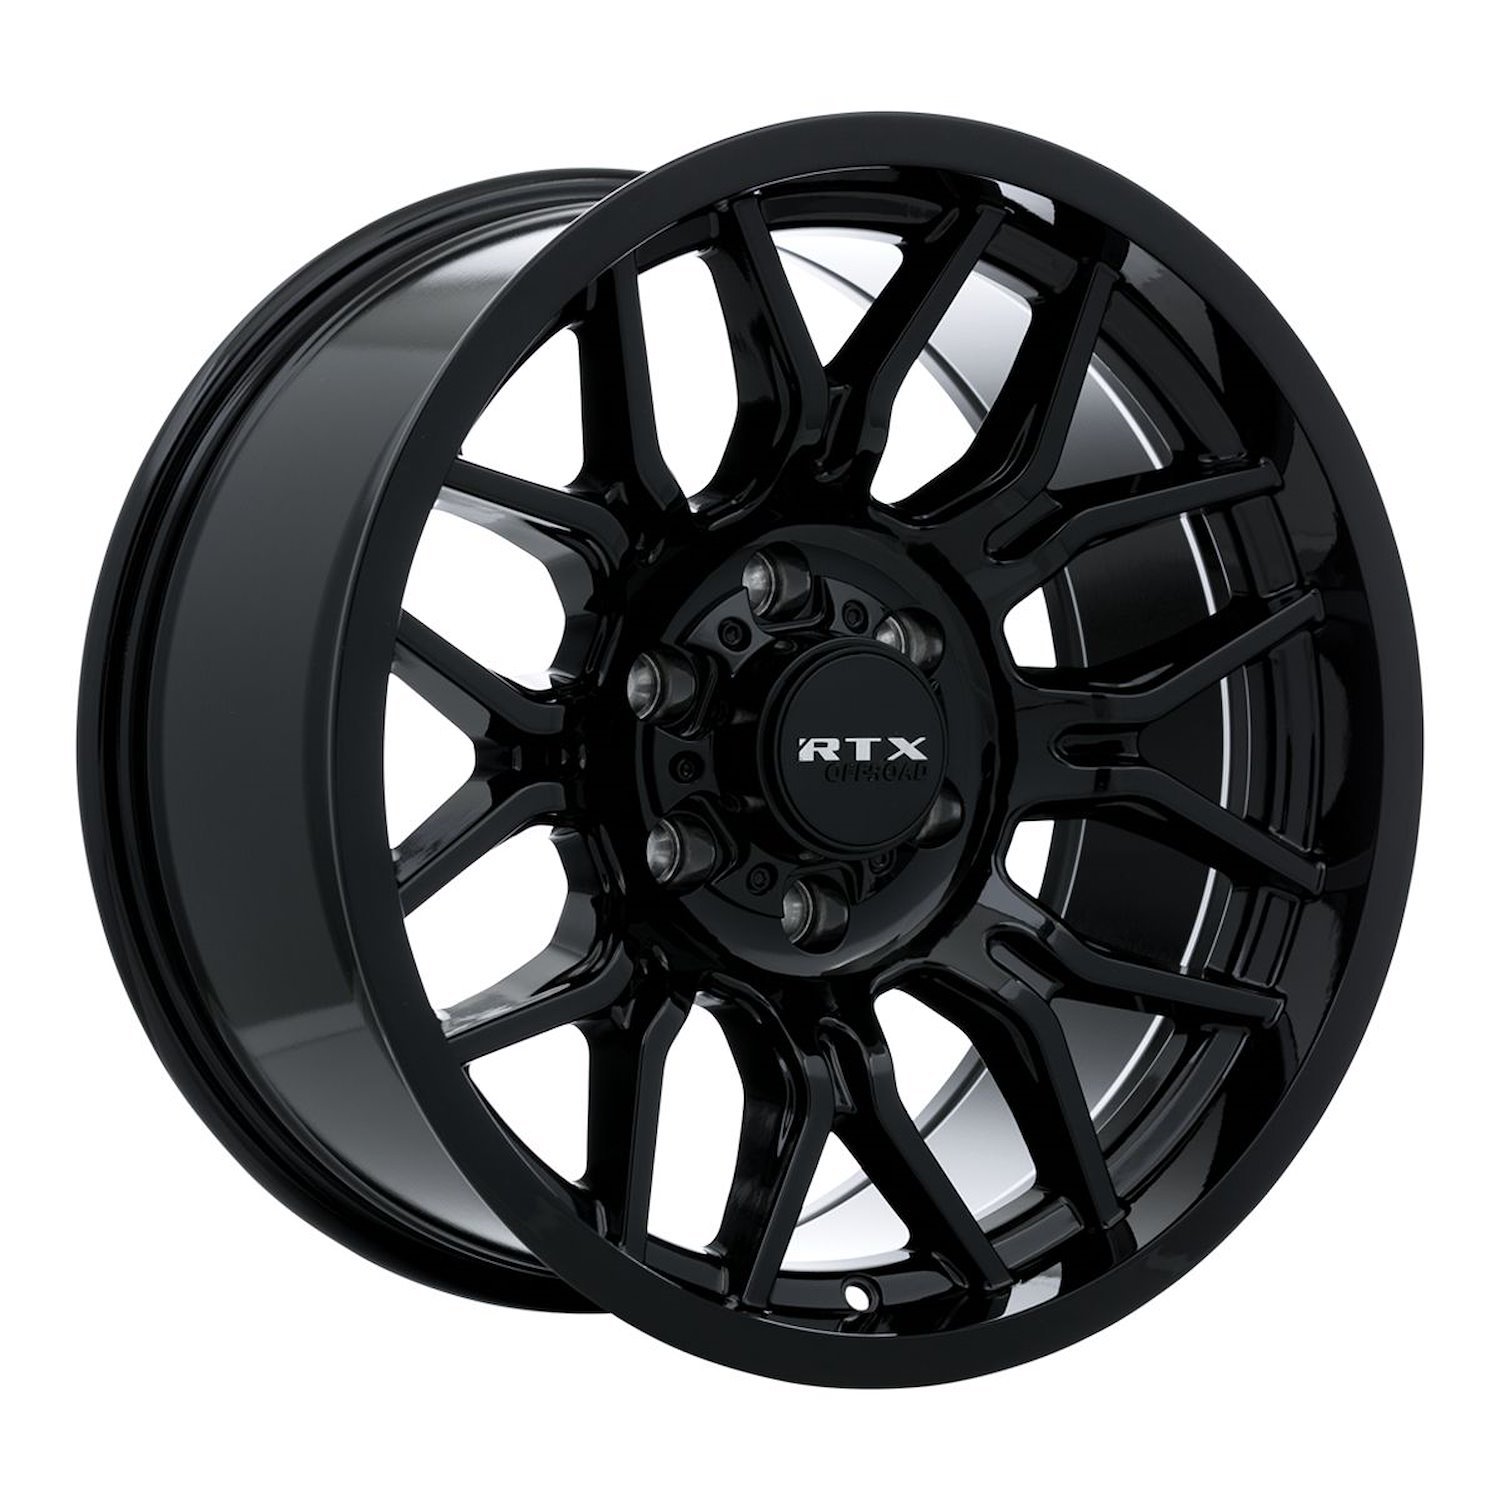 163757 Off-Road Series Claw Wheel [Size: 20" x 9"] Gloss Black Finish